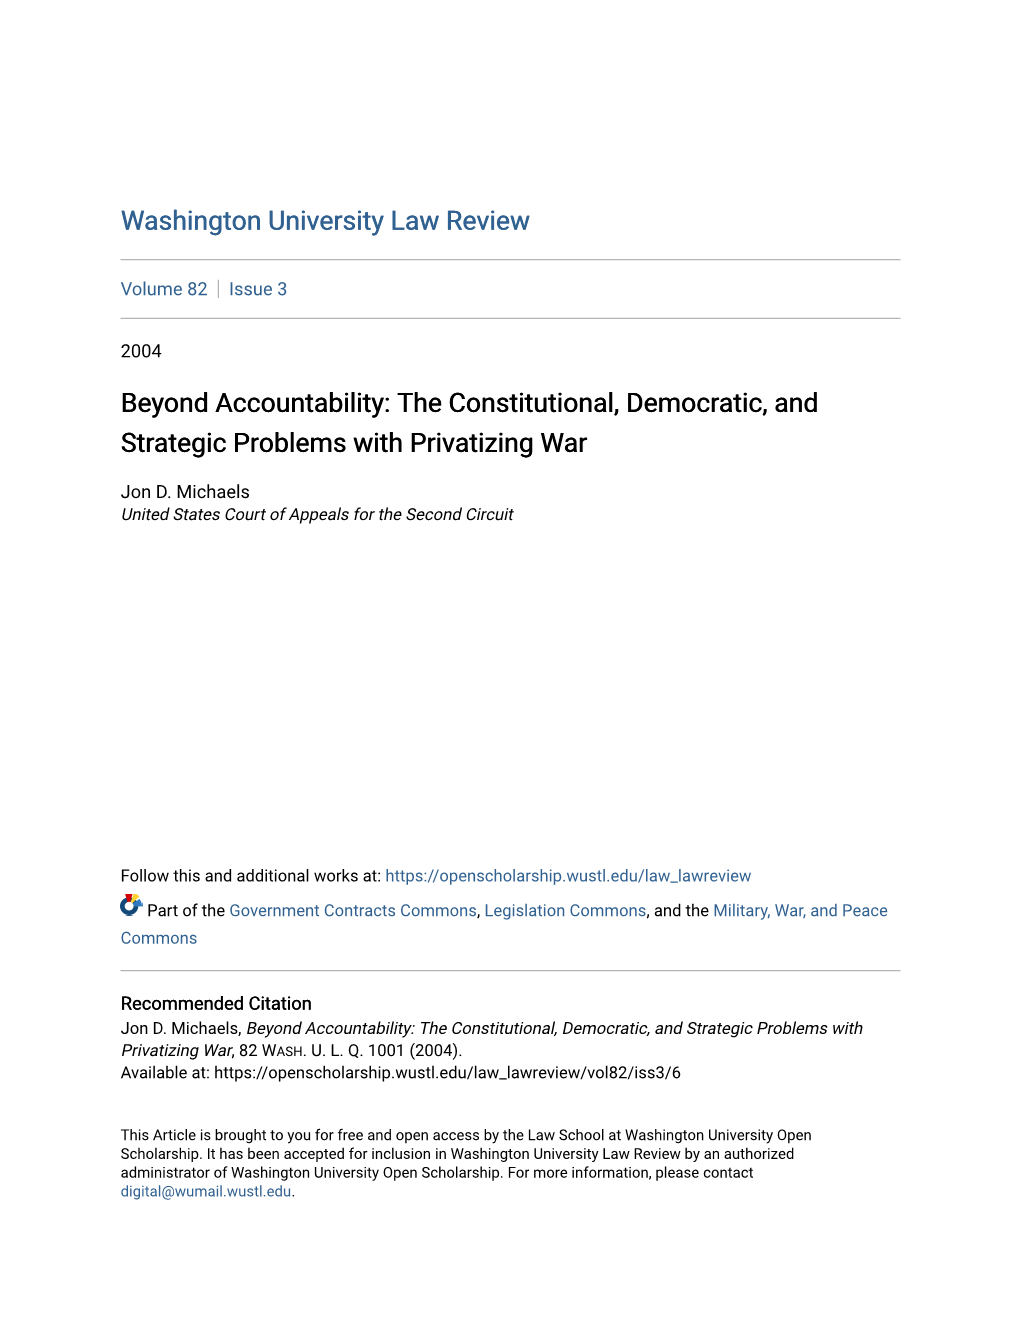 Beyond Accountability: the Constitutional, Democratic, and Strategic Problems with Privatizing War